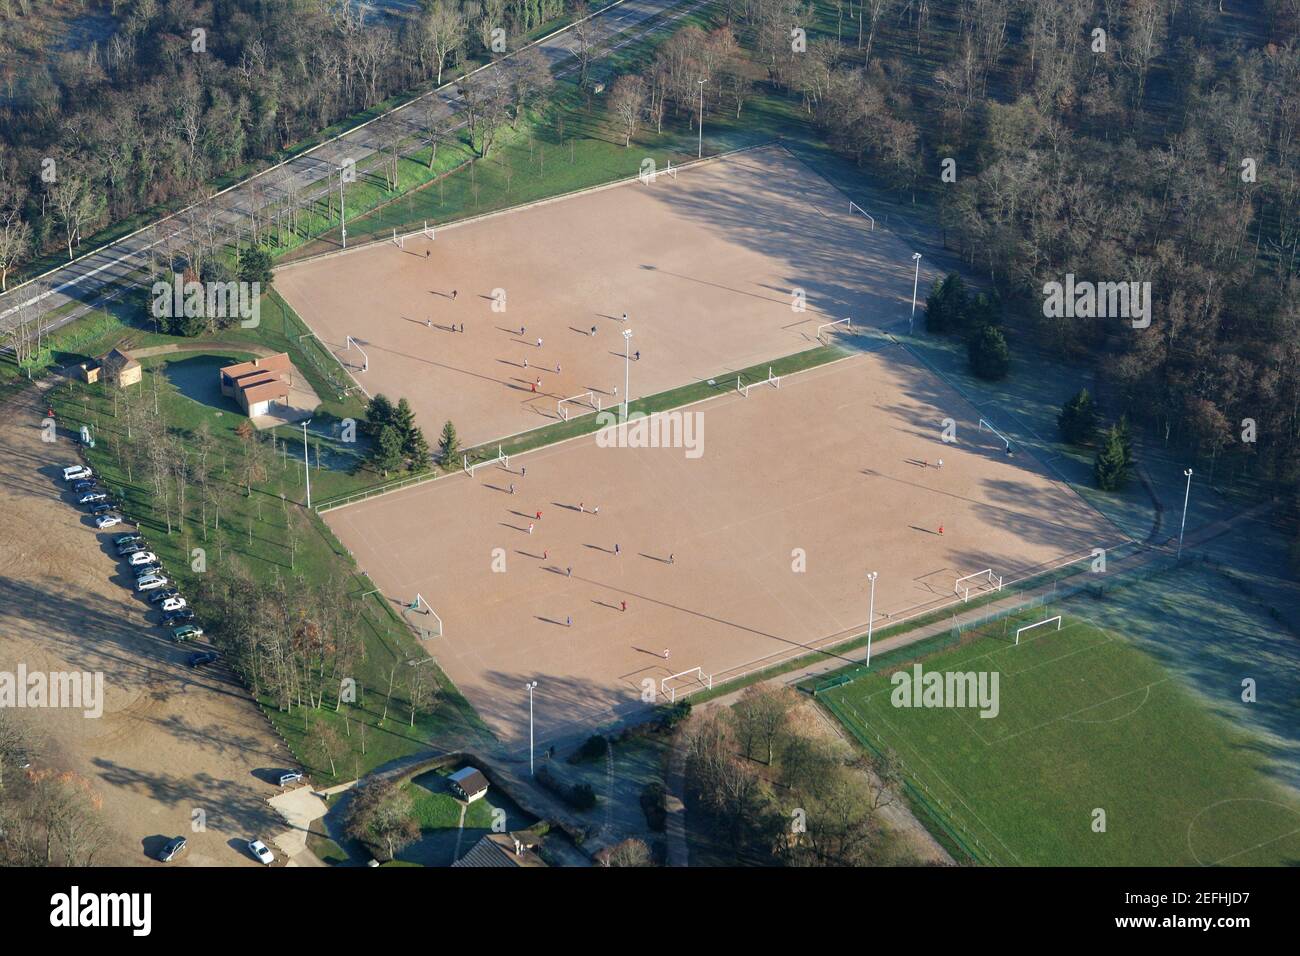 Aerial photography of soccer field in Mantes-la-Jolie, Yvelines  department, Ile-de-France region, France - January 03, 2010 Stock Photo